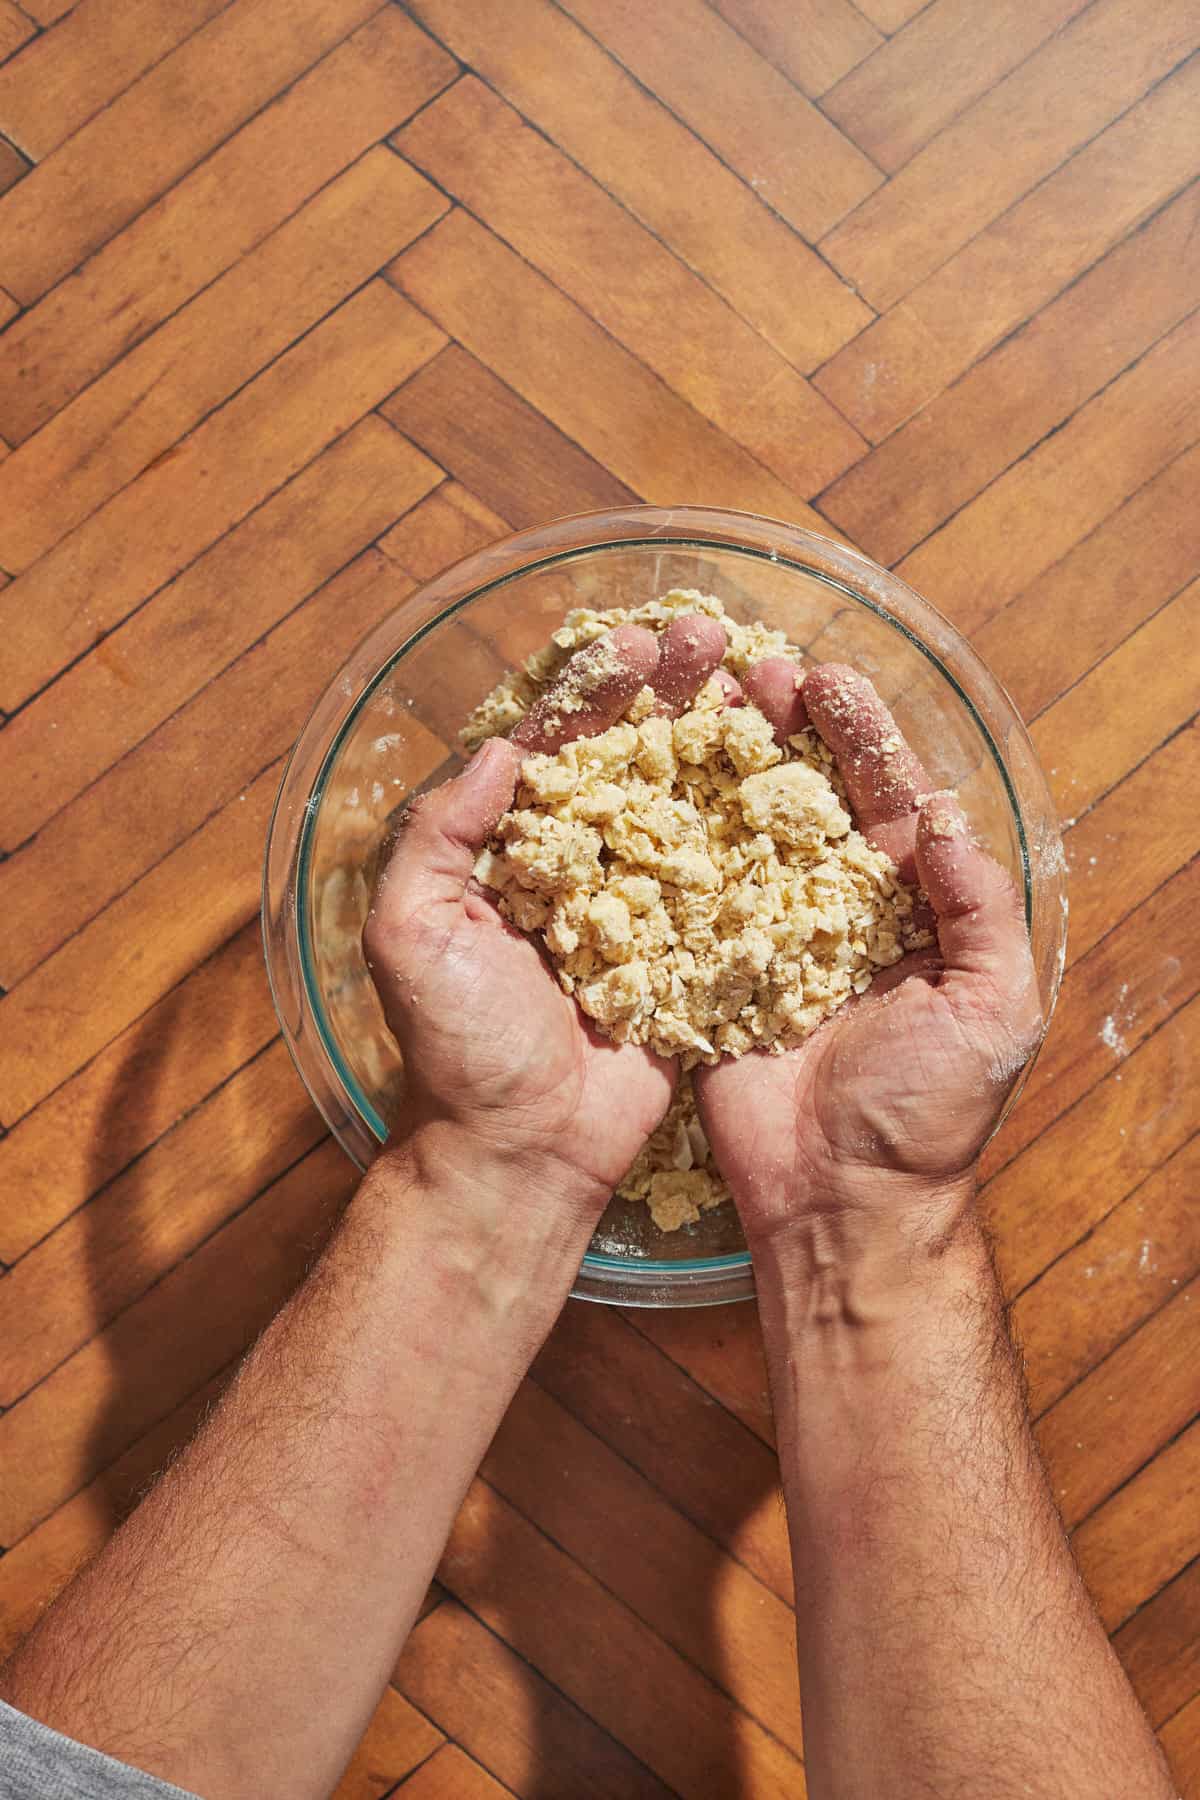 crumble topping in hands over the bowl of mixed ingredients